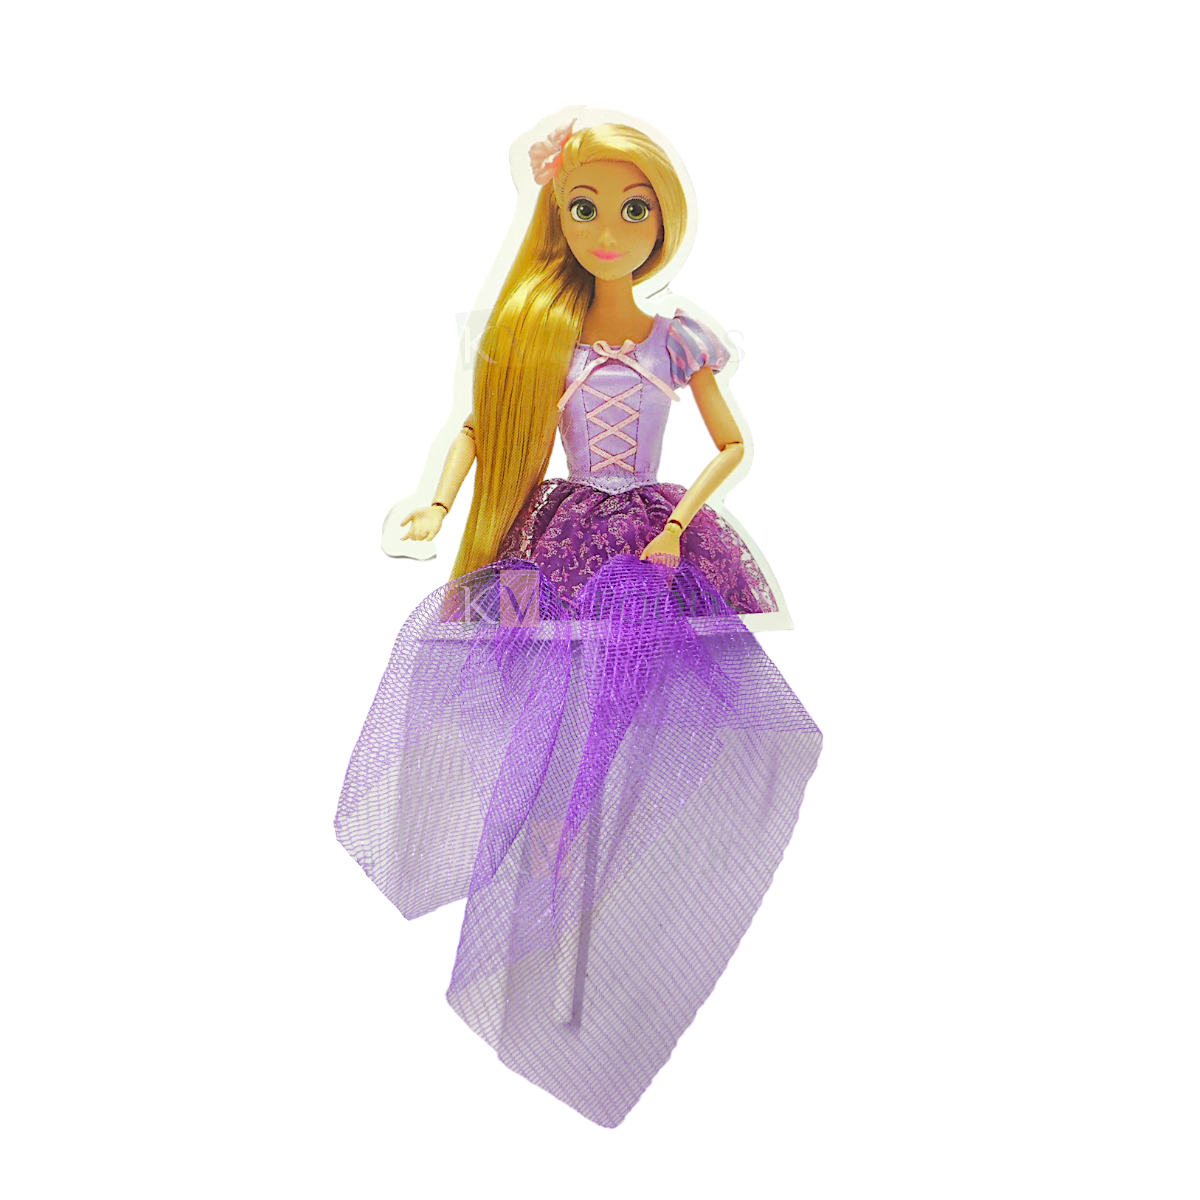 1 PC Purple Disney Rapunzel Classic Princess Net Skirt Girl Lady Women Paper Cake Topper for Bride Wedding, Mother's Day, Women's Day Theme, Pull Me Up Doll Cakes Daughter Birthday DIY Cake Decoration